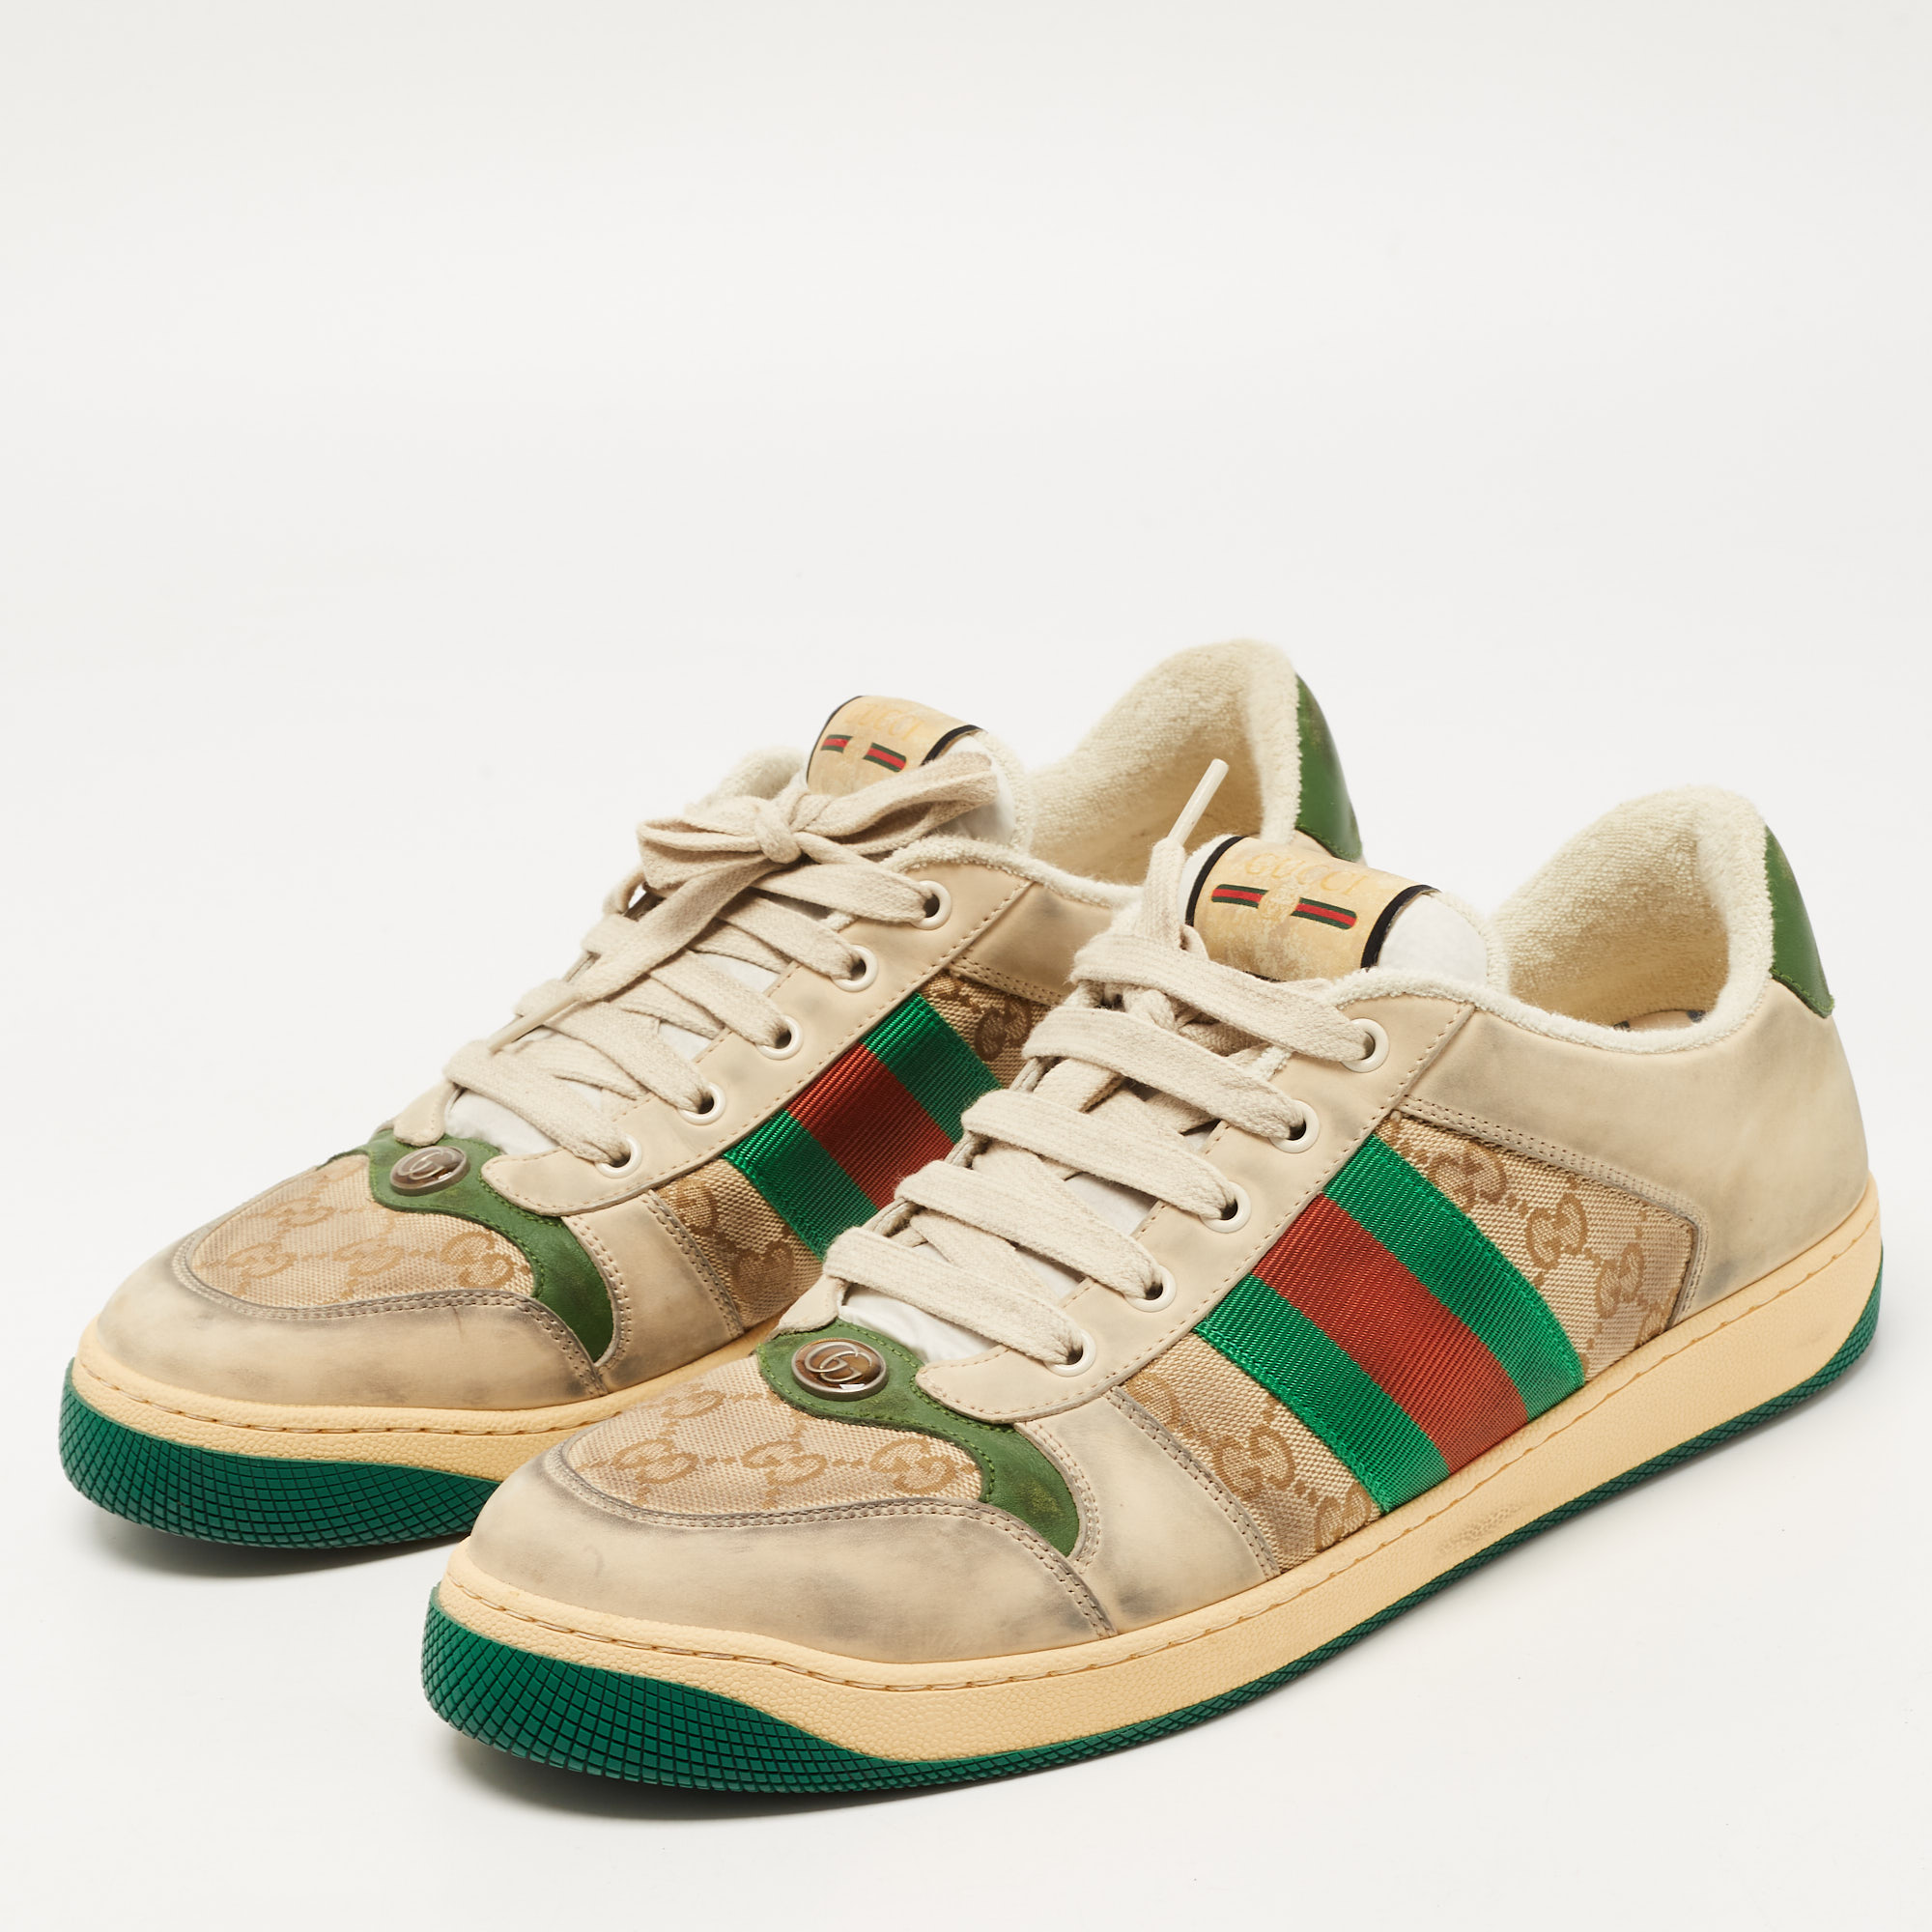 

Gucci Beige/Brown Suede and GG Canvas Screener Sneakers Size